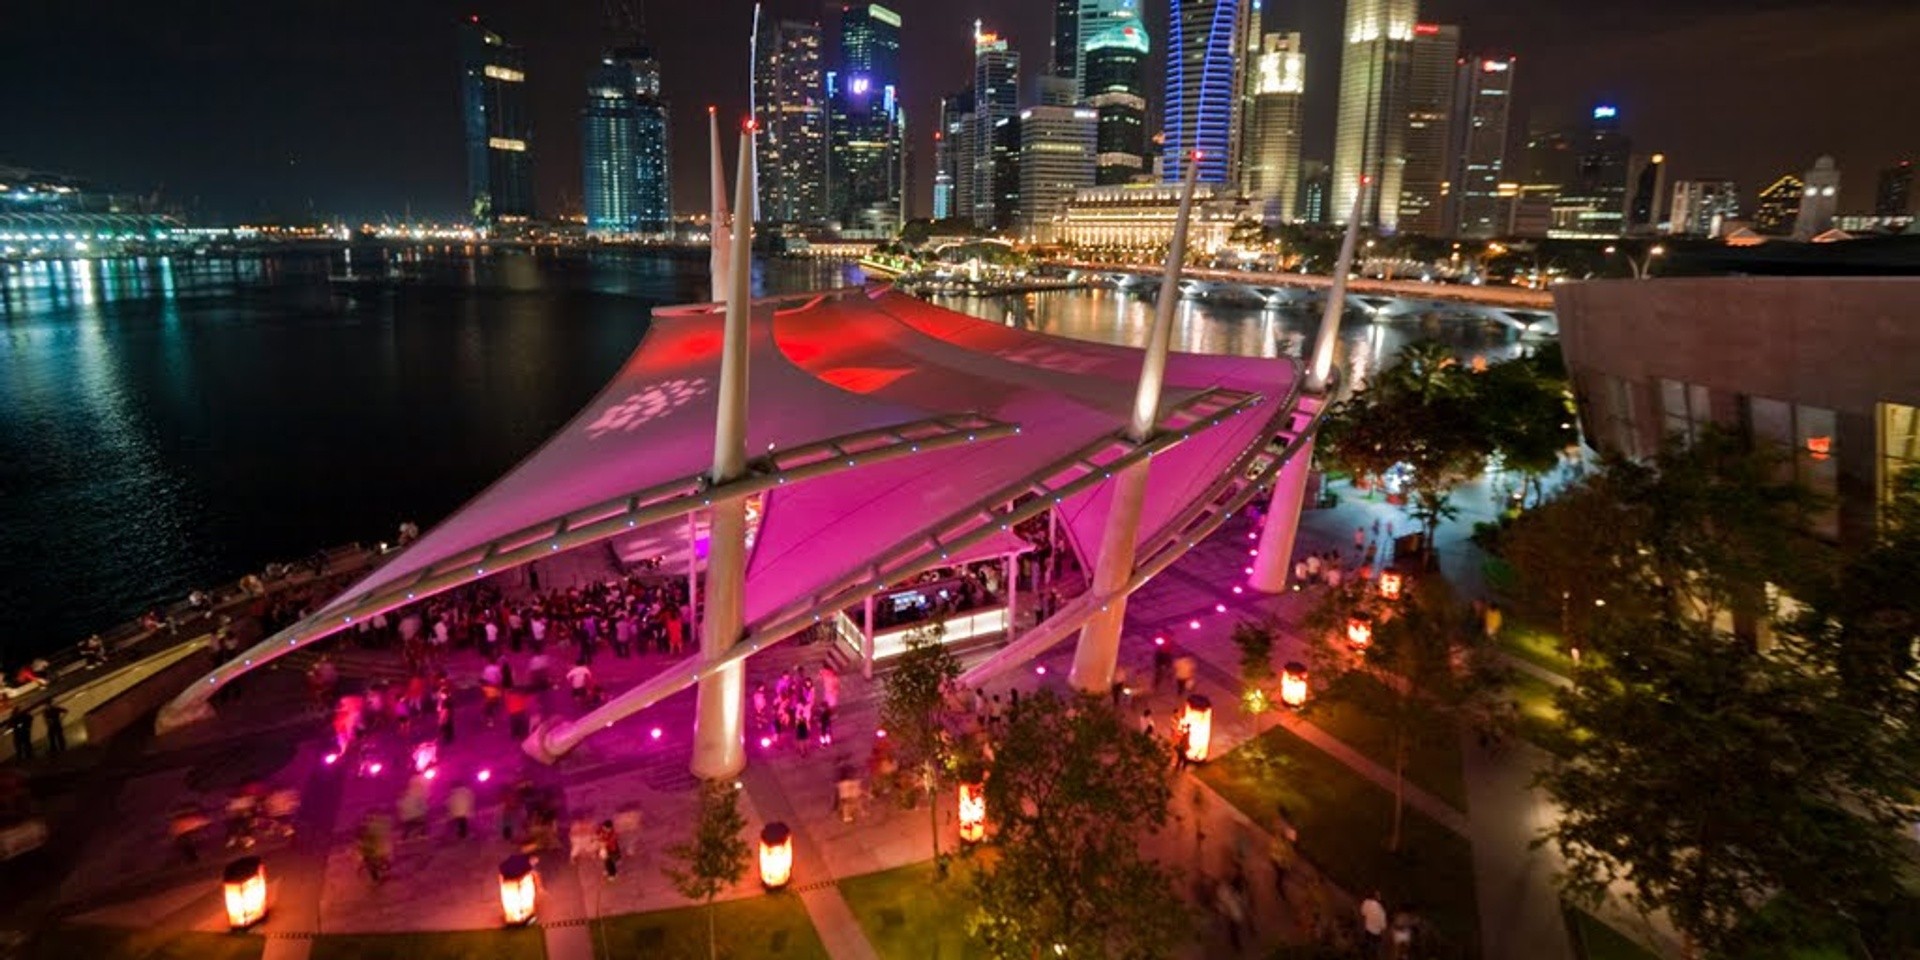 Esplanade Outdoor Theatre will be turned into a dancefloor for one night only